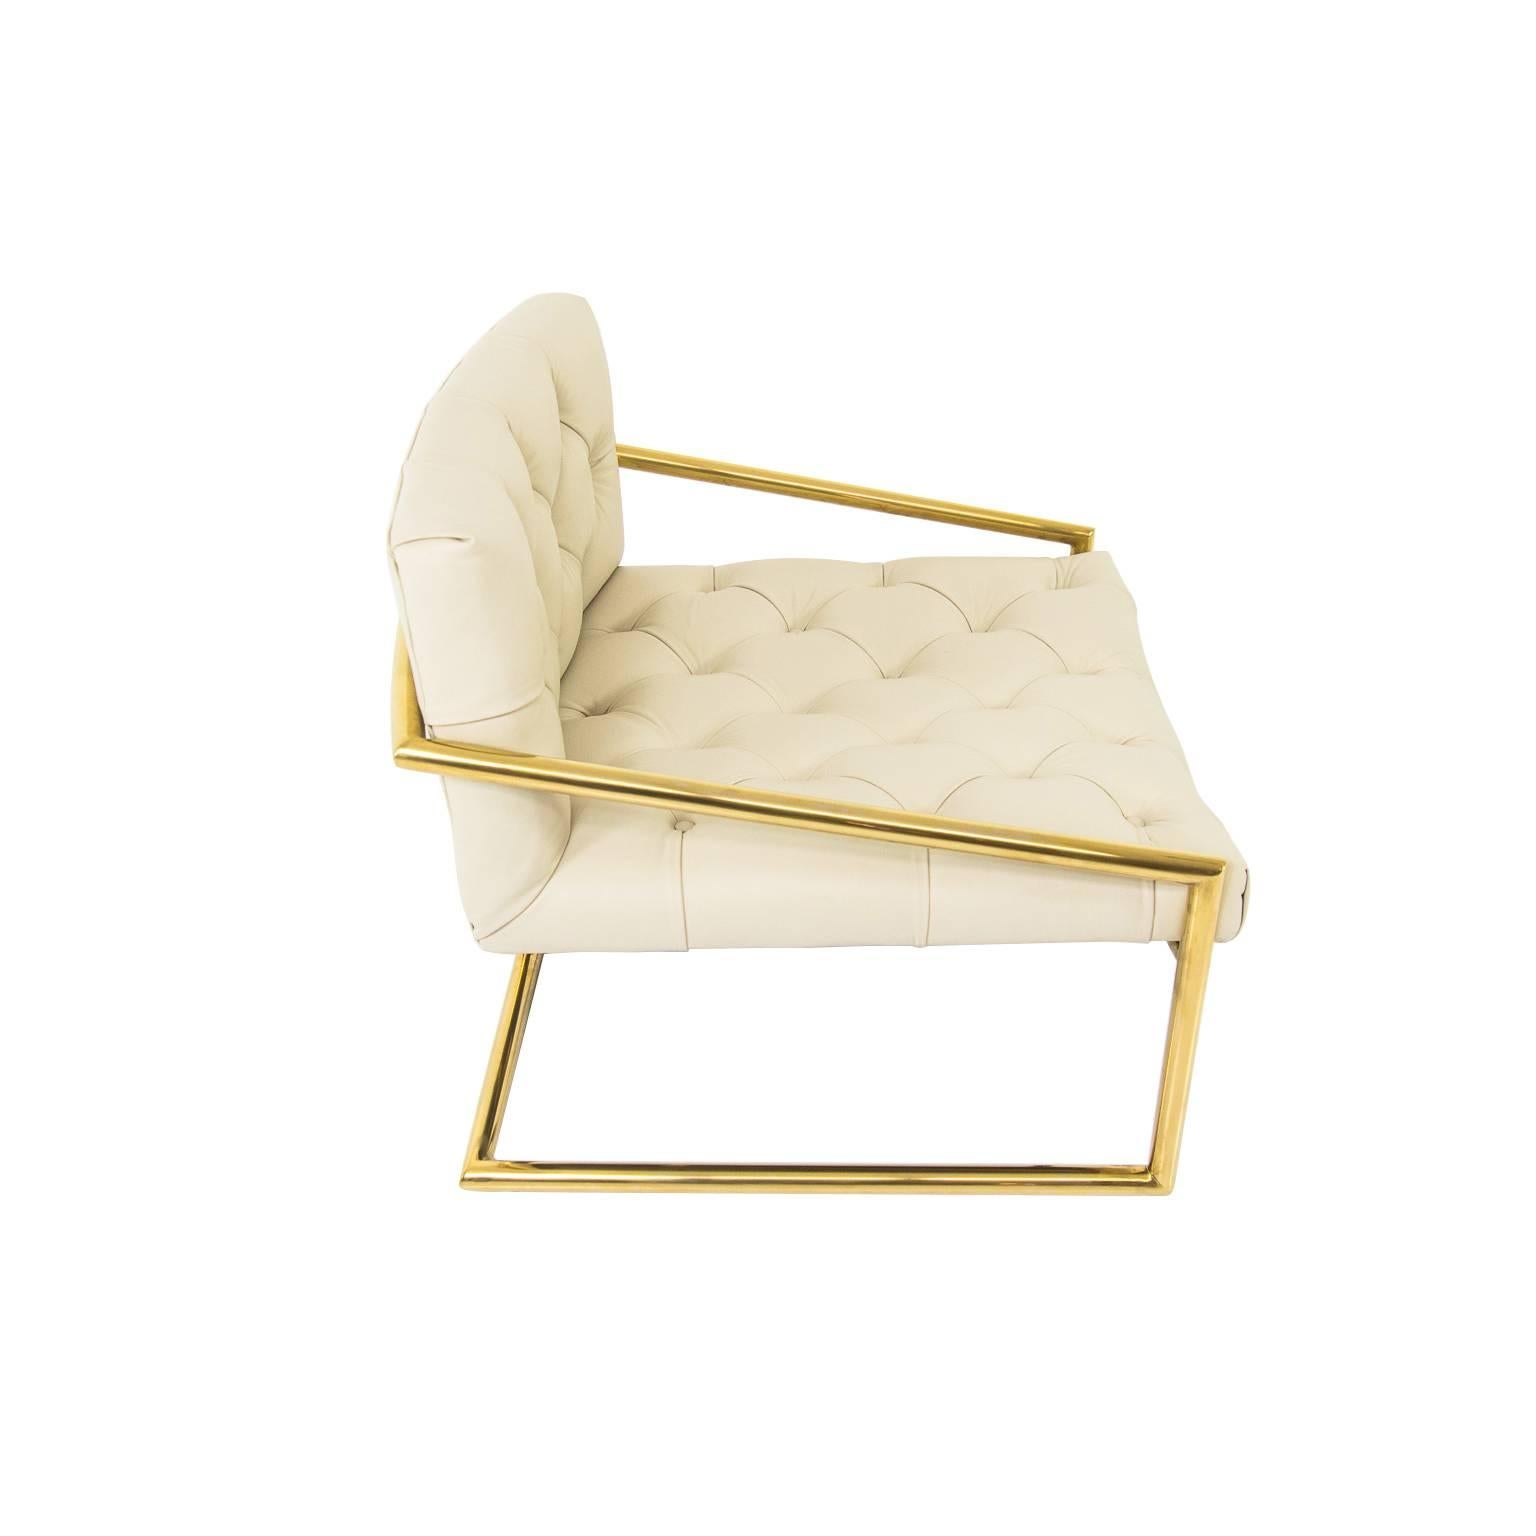 American Modern Style Hampton Chair in Tufted Cream Leather w/ Brass Tubing Base For Sale